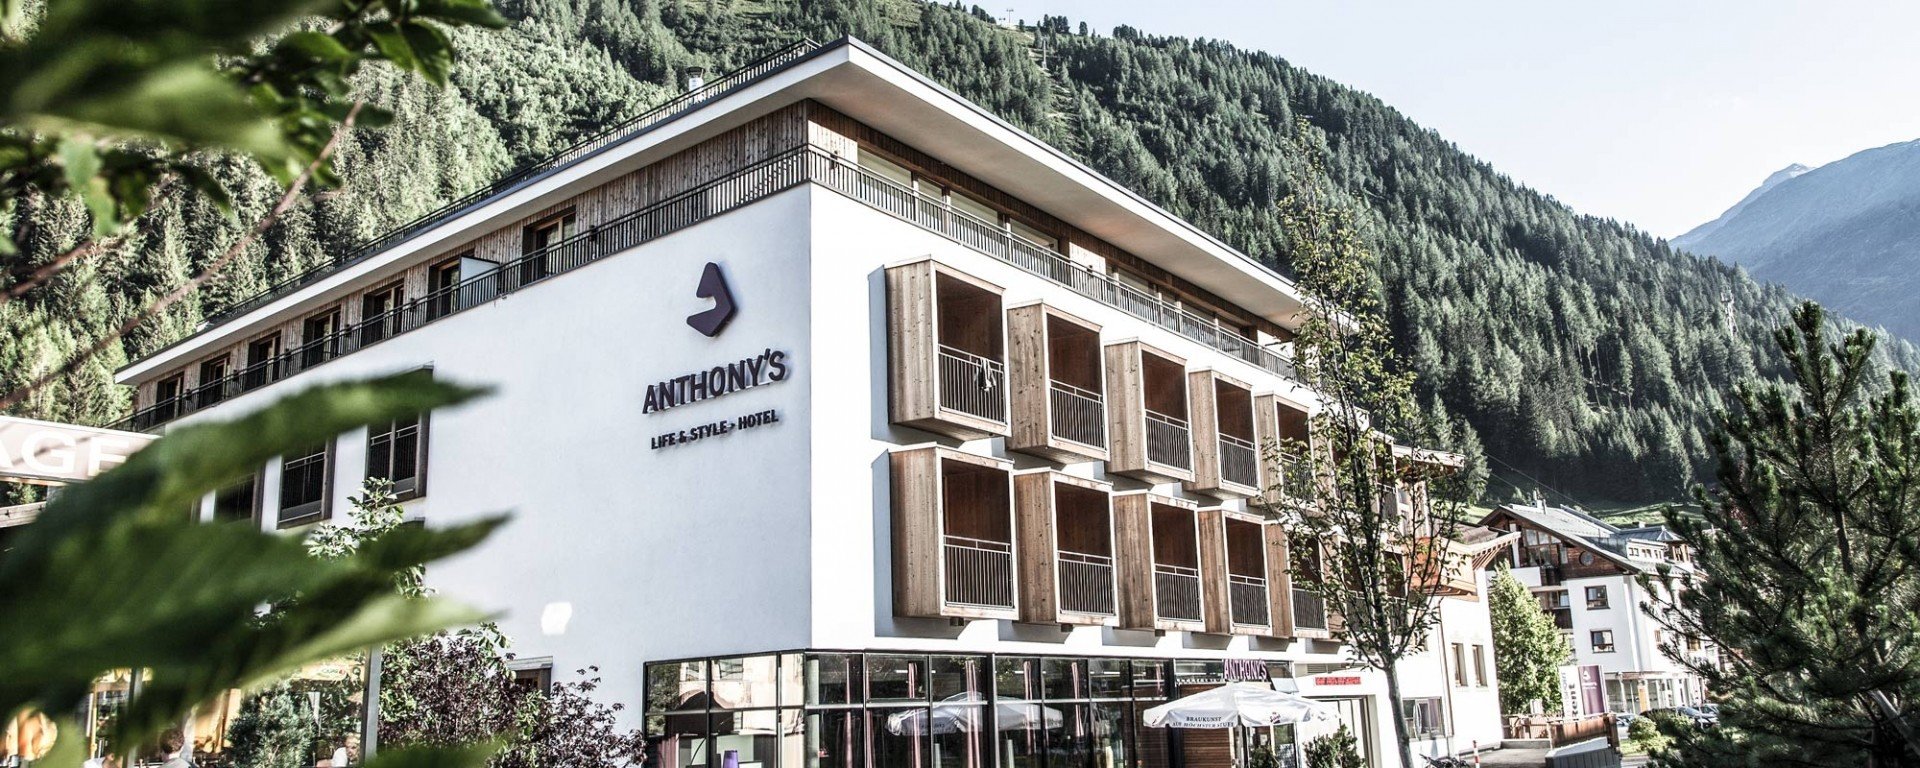 6 Tage Pure Mountains – Anthonys Life &amp, Style Hotel (4 Sterne) in St. Anton am Arlberg, Tirol inkl. Halbpension